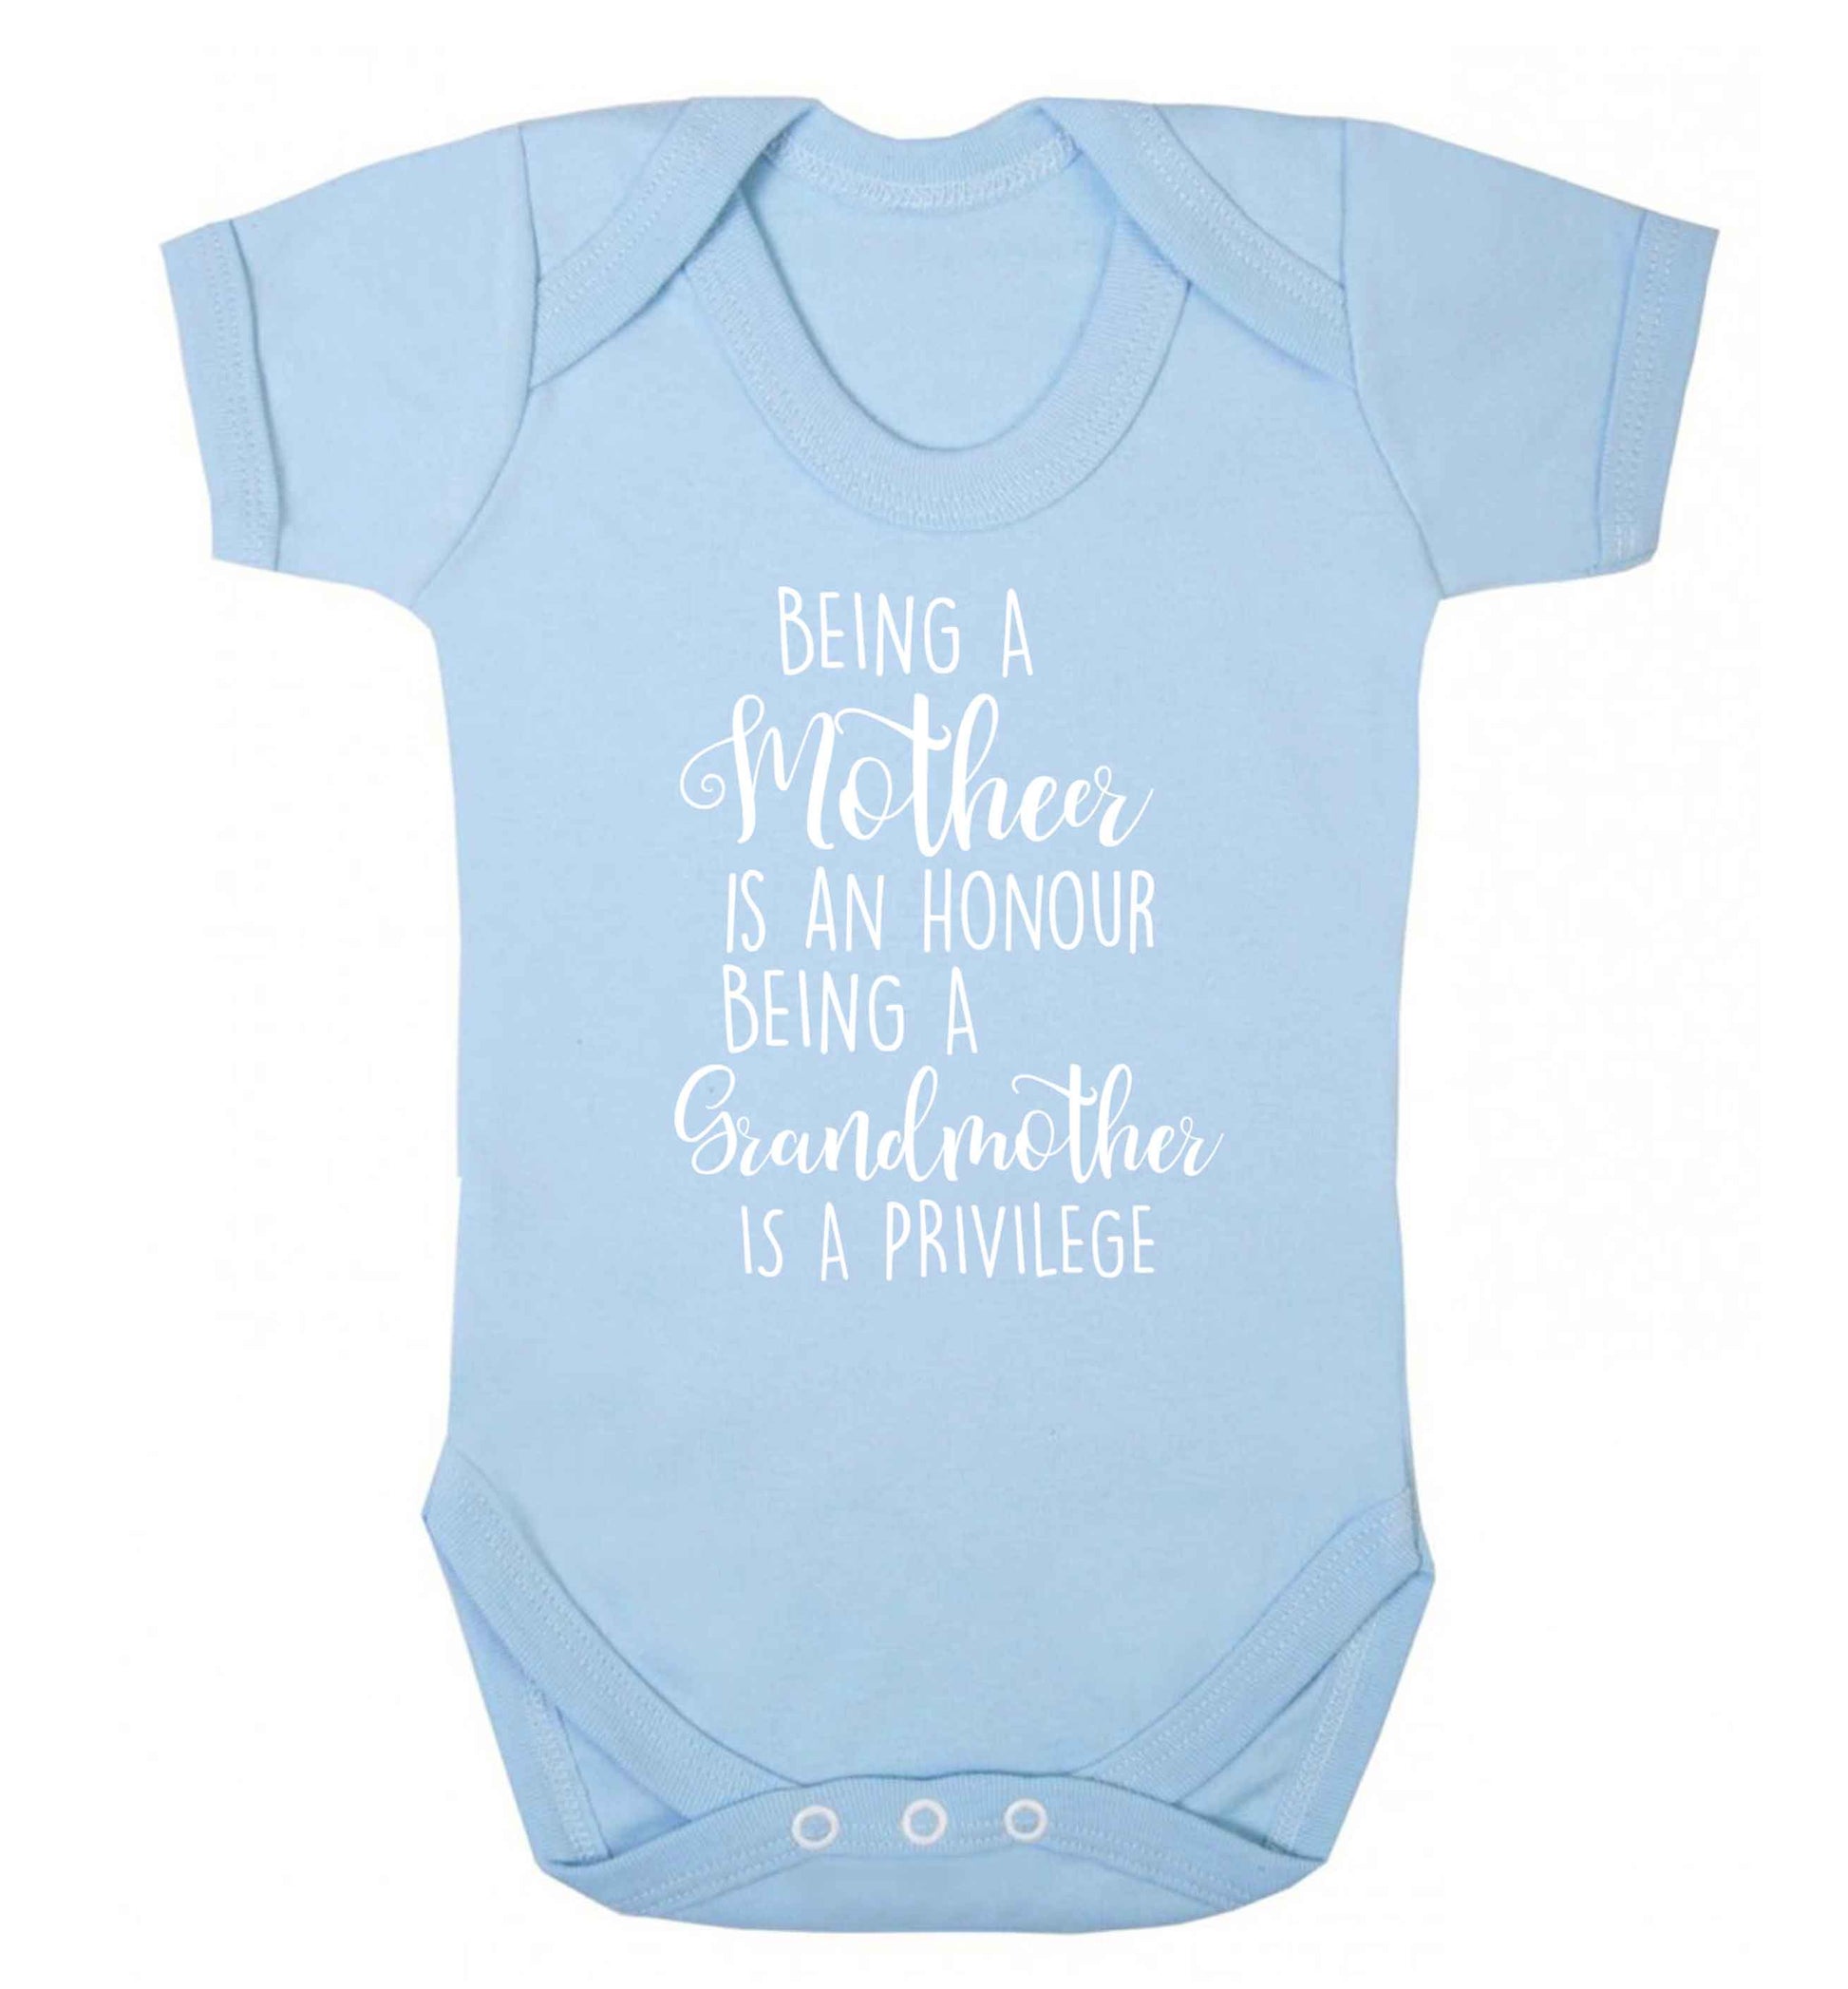 Being a mother is an honour being an grandmother is a privilege Baby Vest pale blue 18-24 months